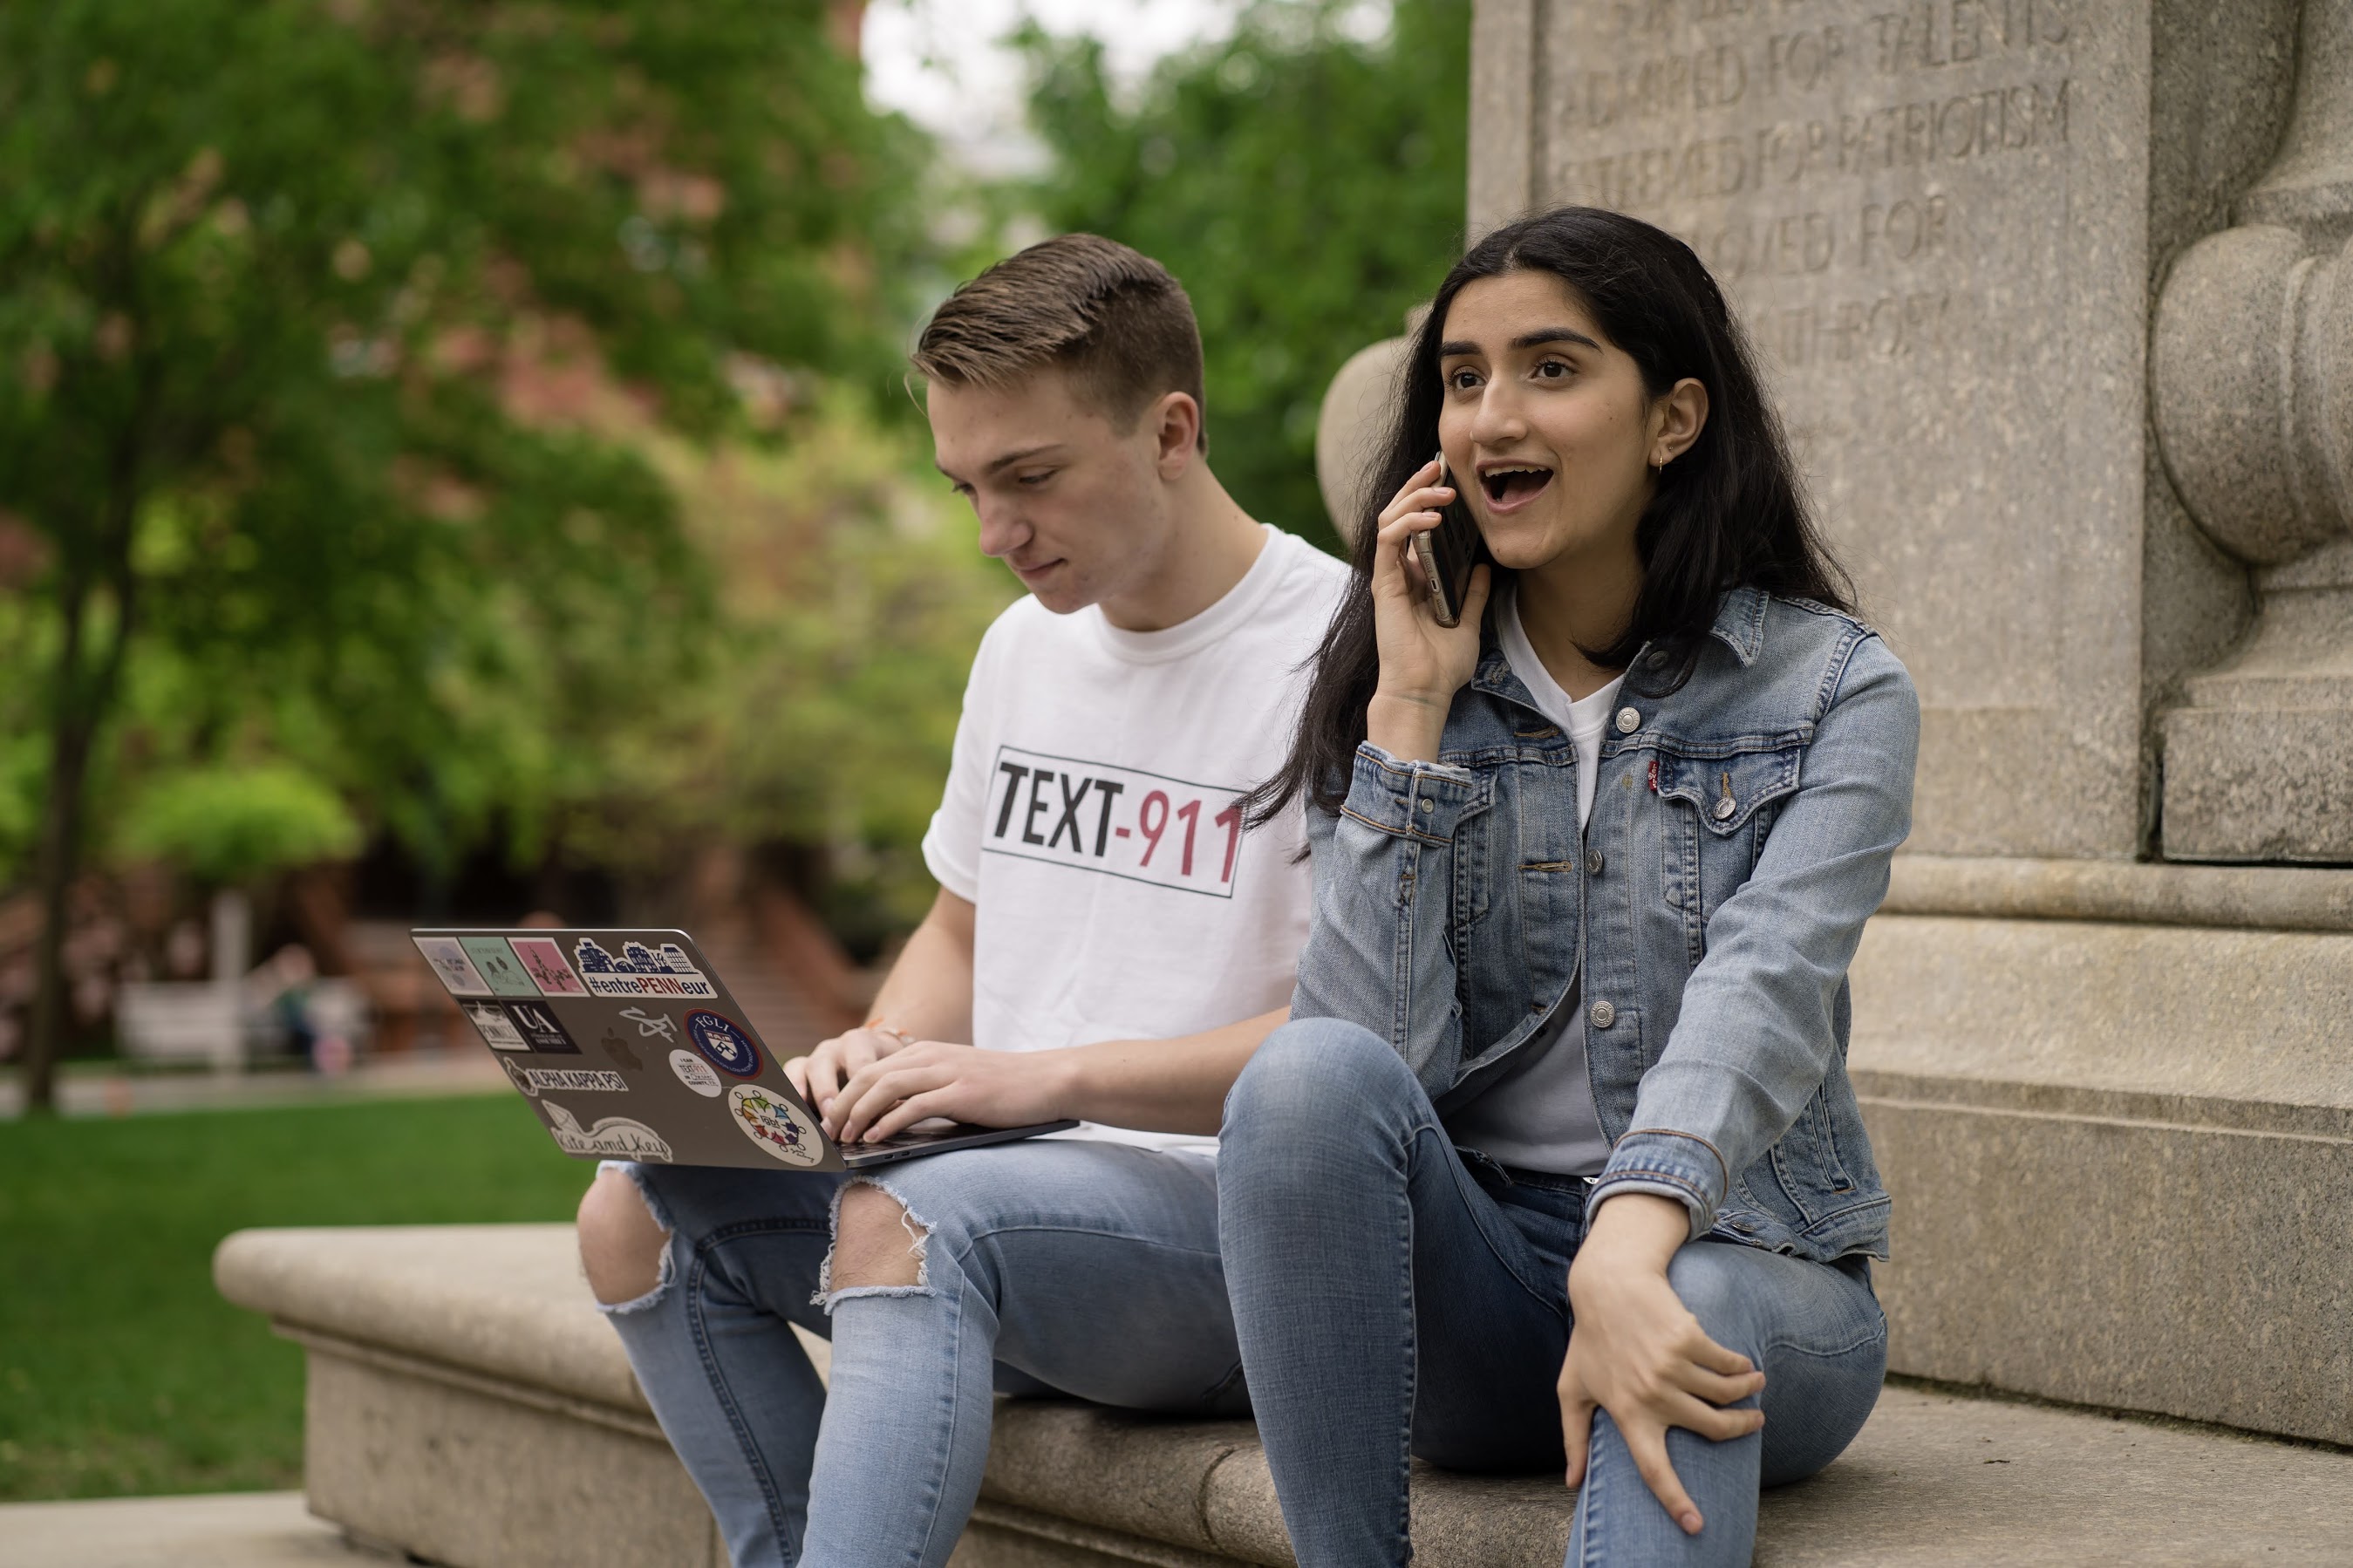 Two students sitting on a stone statue, one on a computer, the other on a phone.